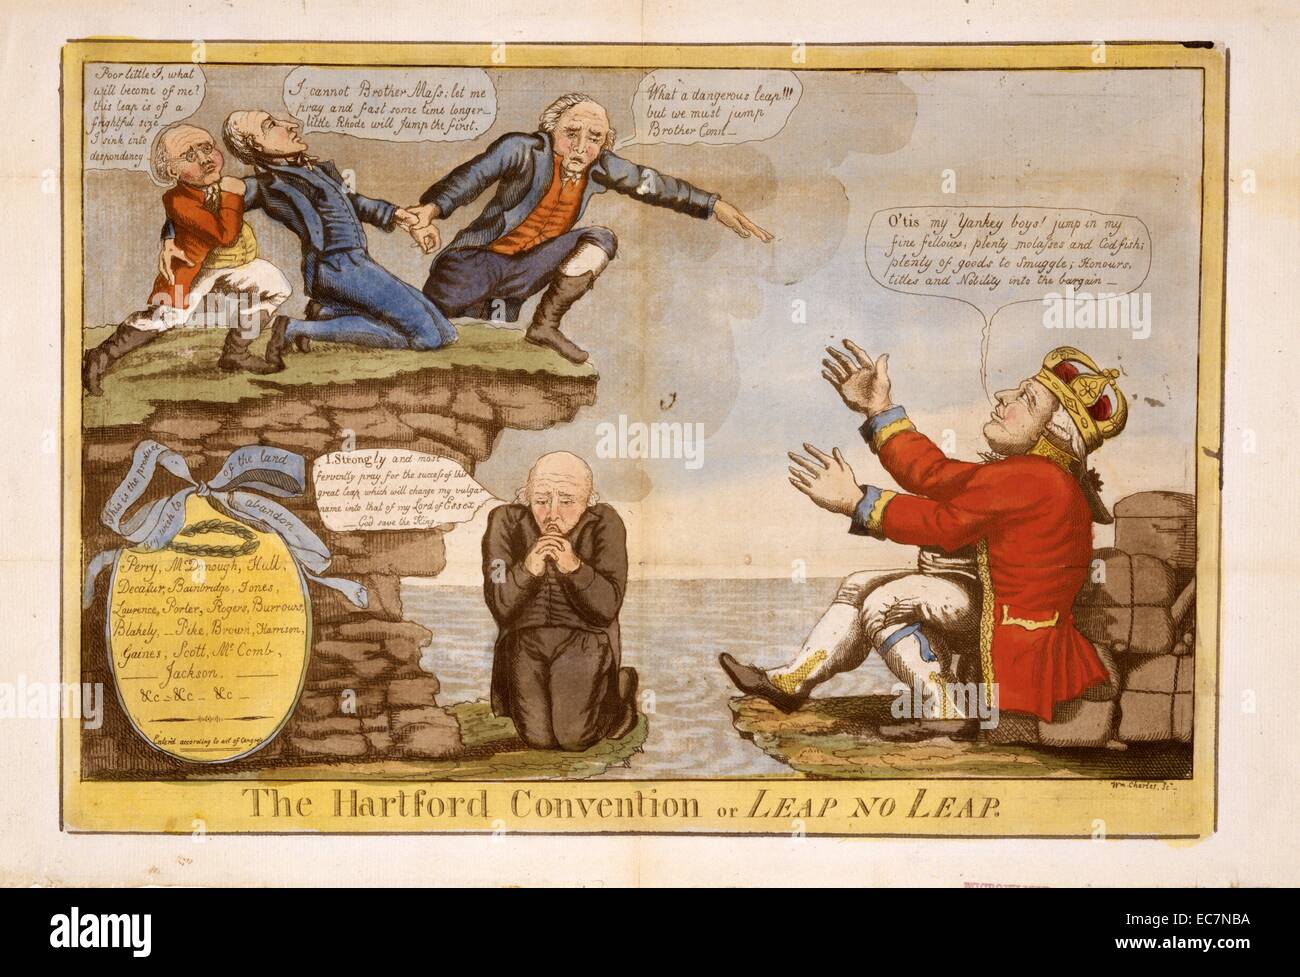 The Hartford Convention or Leap no leap by William Charles. Charles's satire attacks the Hartford Convention, a series of secret meetings of New England Federalists held in December 1814. The artist caricatures radical secessionist leader Timothy Pickering and lampoons the inclinations toward secession by convention members Rhode Island, Massachusetts, and Connecticut, alleging encouragement from English King George III. Stock Photo